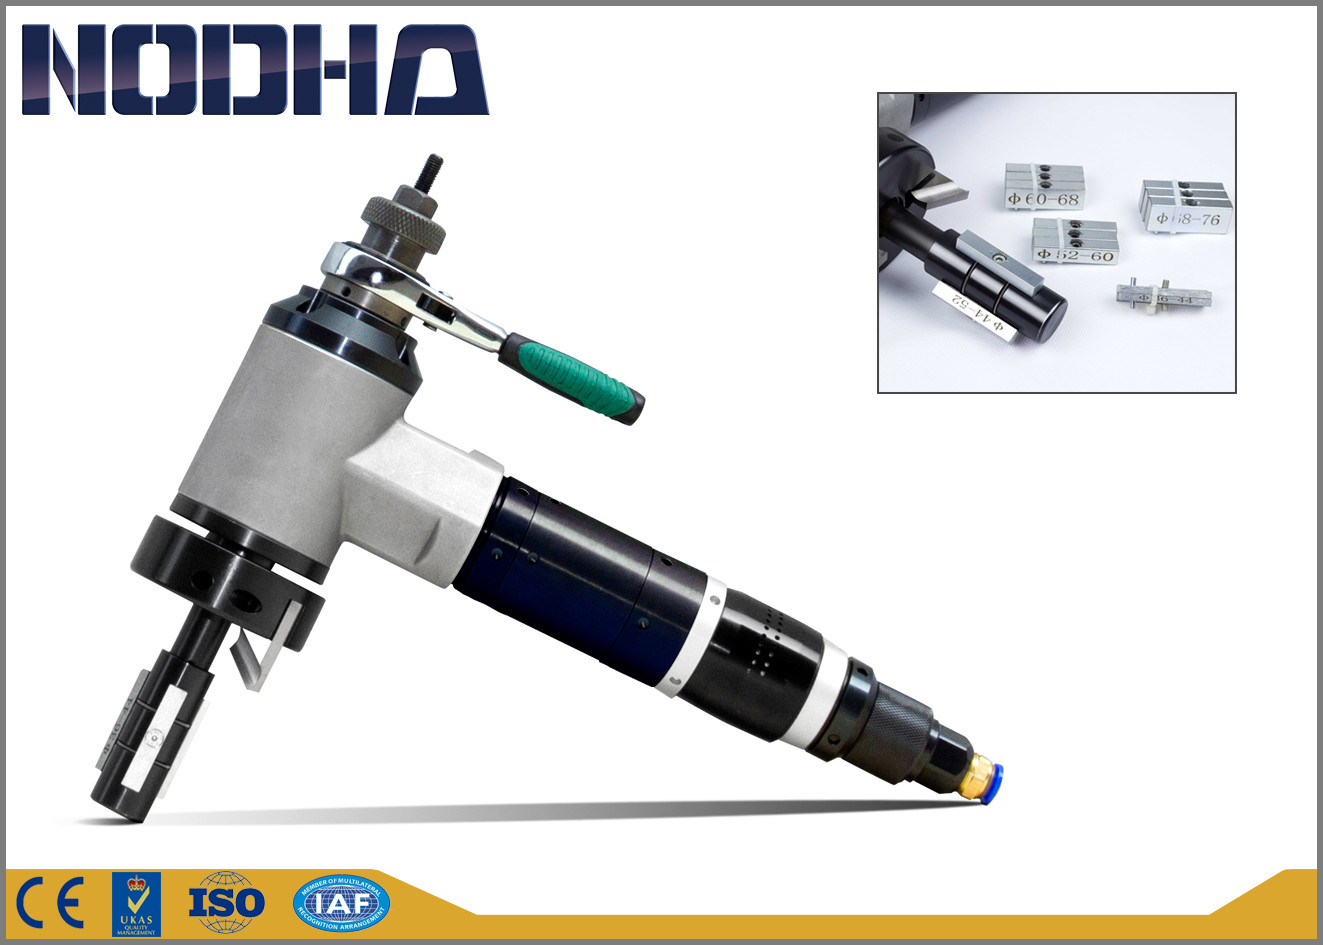 900L/Min@0.6Mpa Pneumatic Pipe Beveling Machine autofeed 3'' OD new surface treatment OEM / ODM Available NODHA